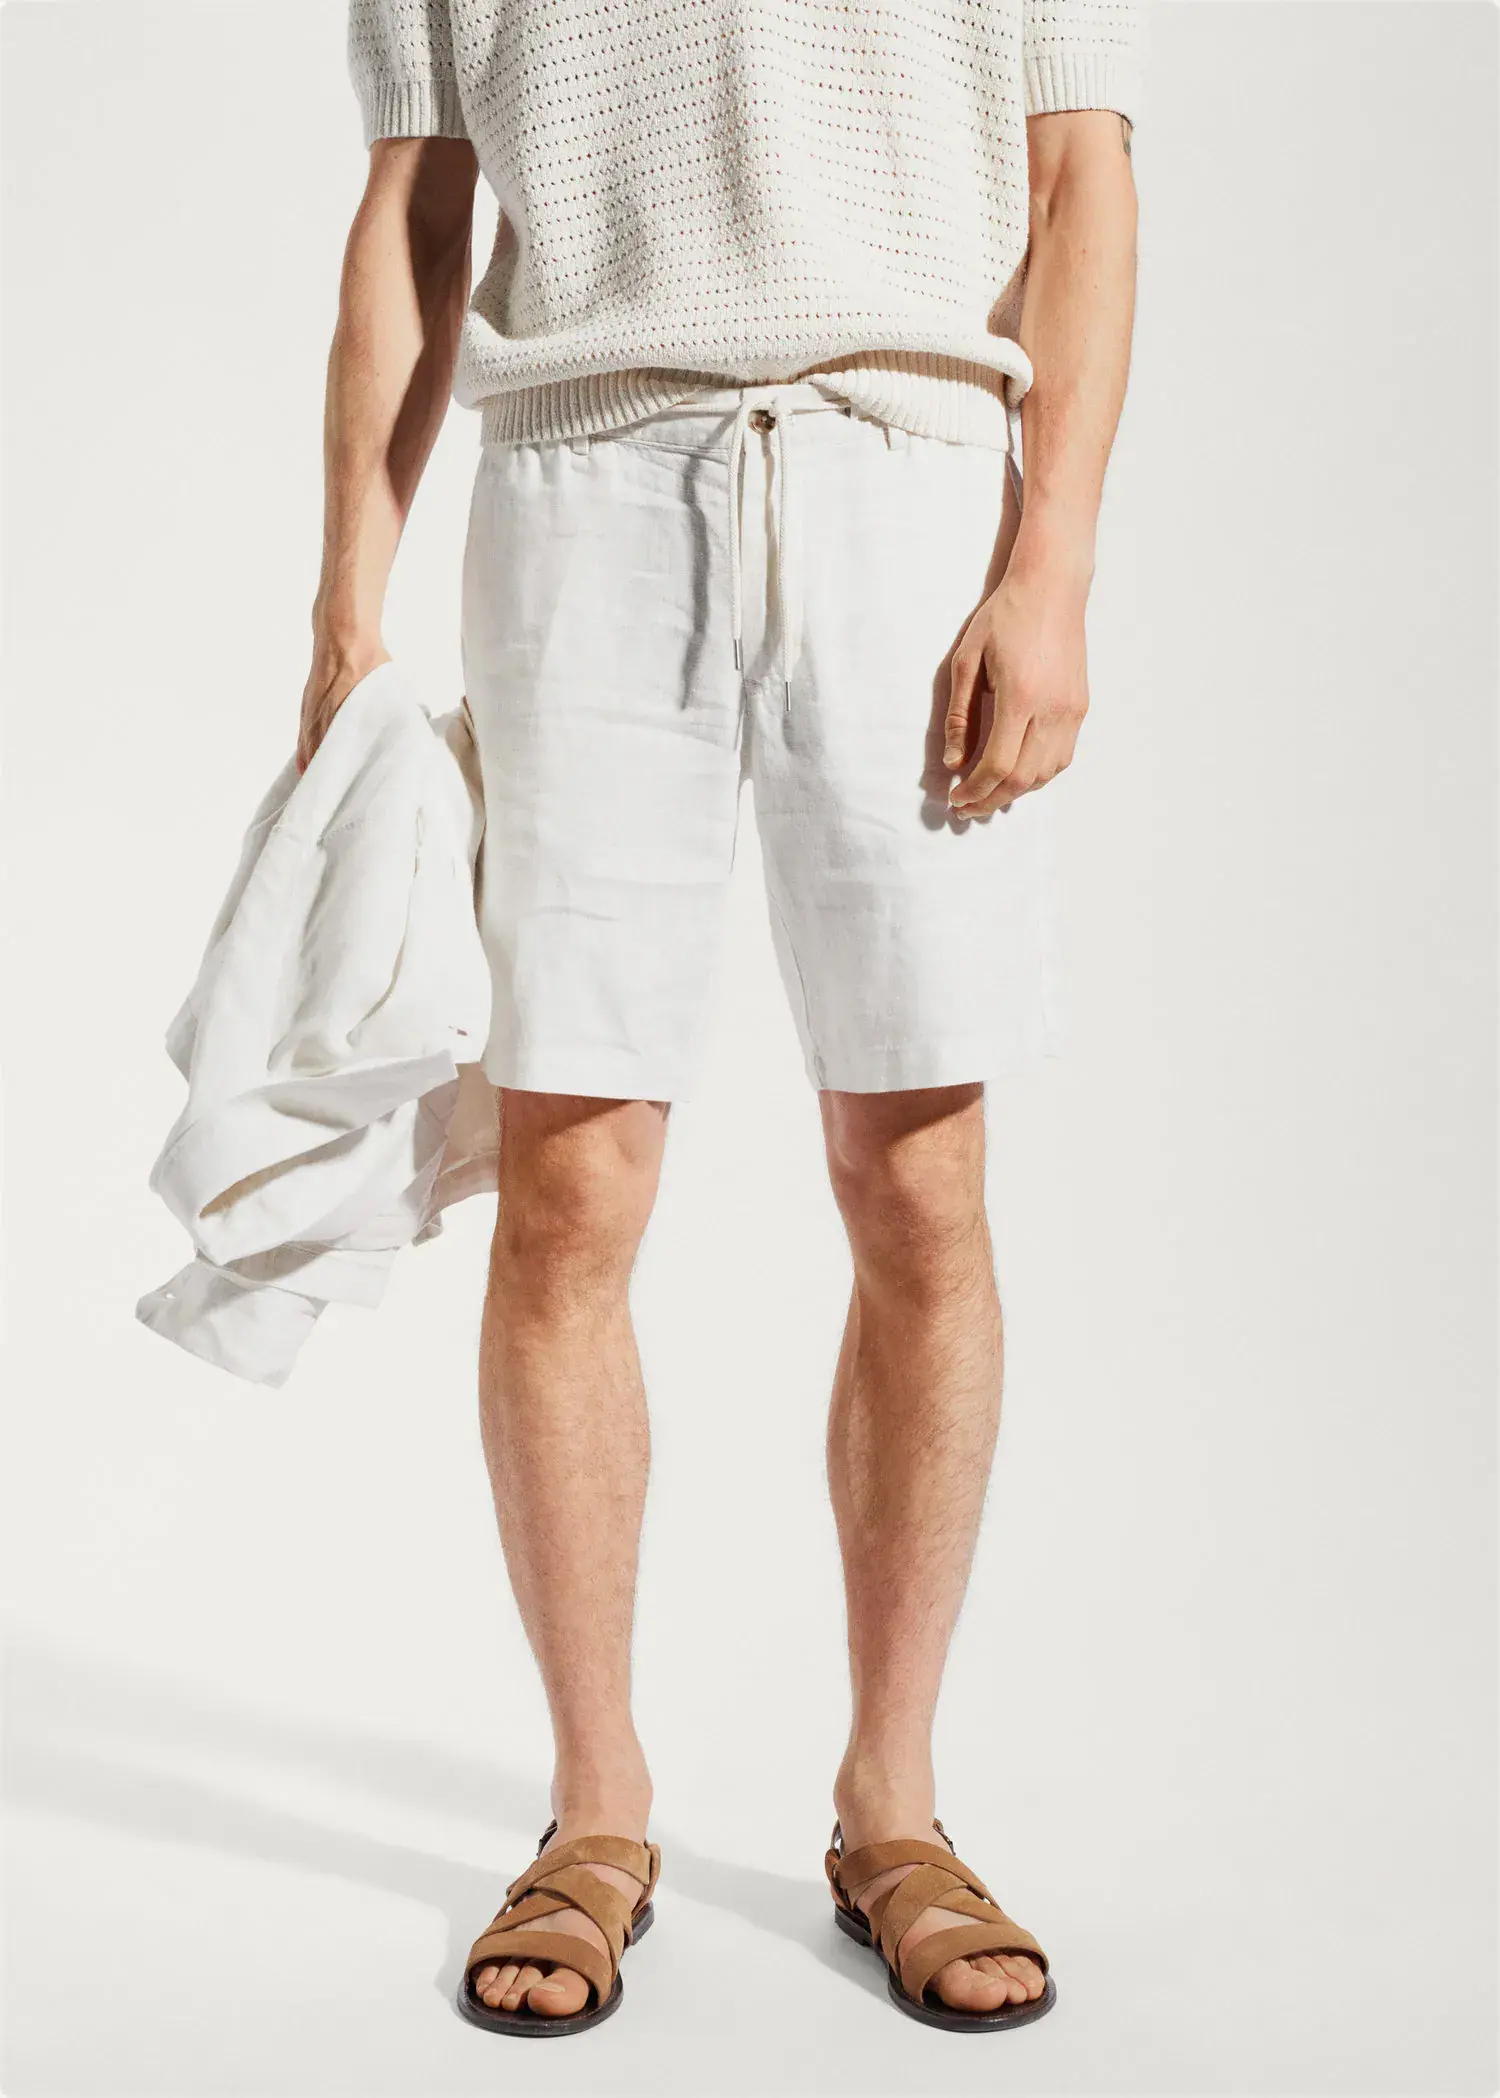 Mango 100% linen bermuda shorts with drawstring. a man in white shorts holding a white towel. 